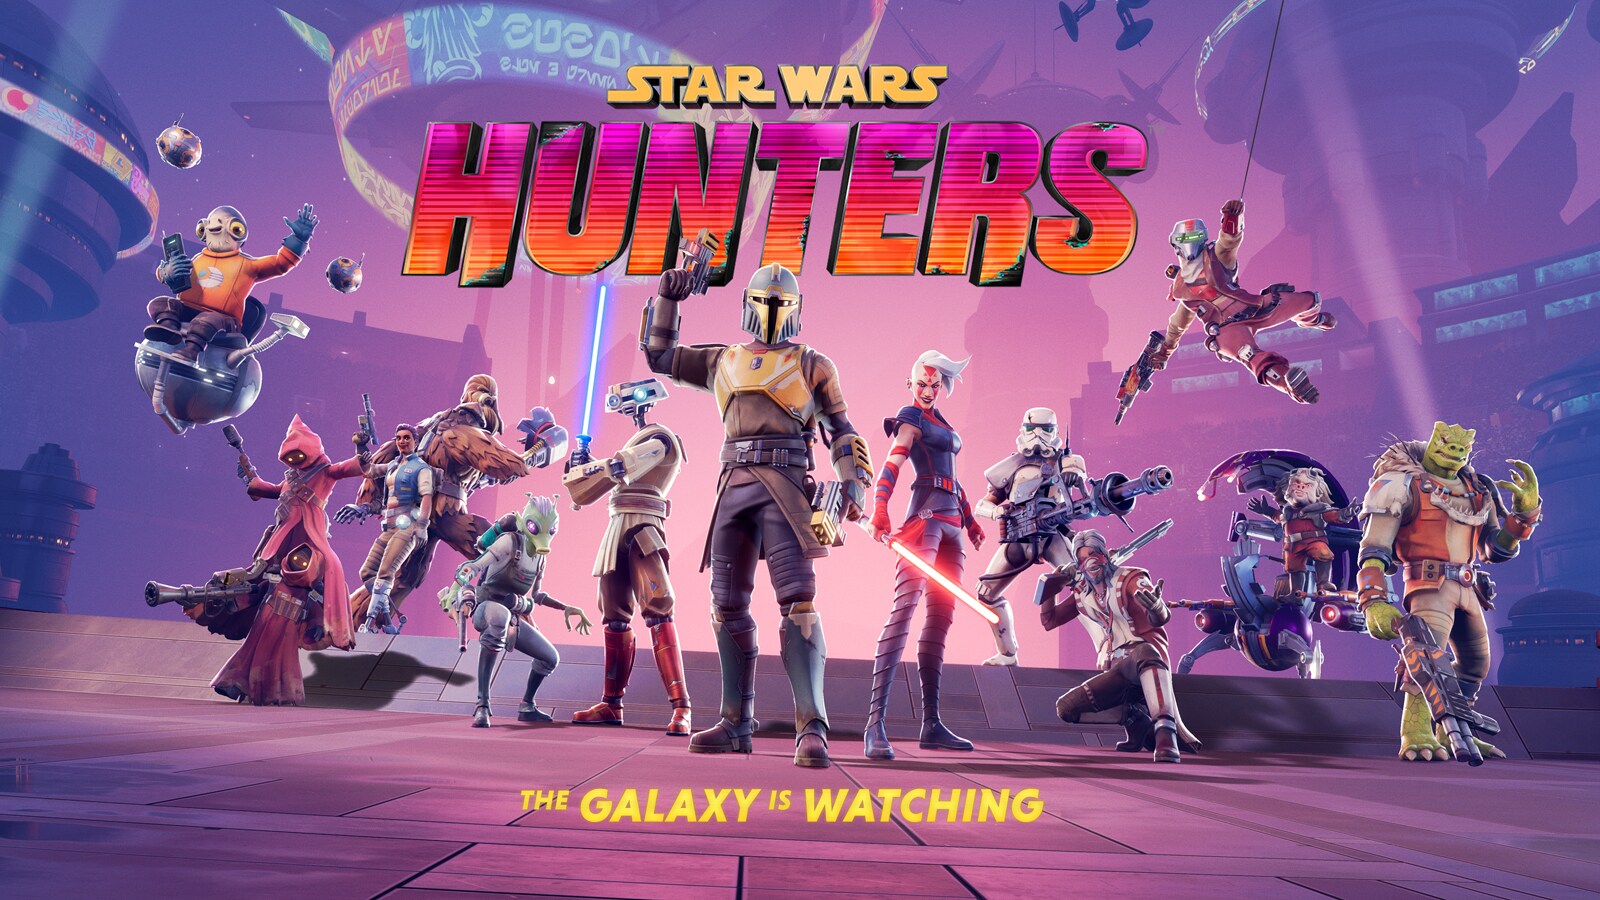 Star Wars-themed event in Fortnite, showcasing exciting in-game activities in the year of the current event.